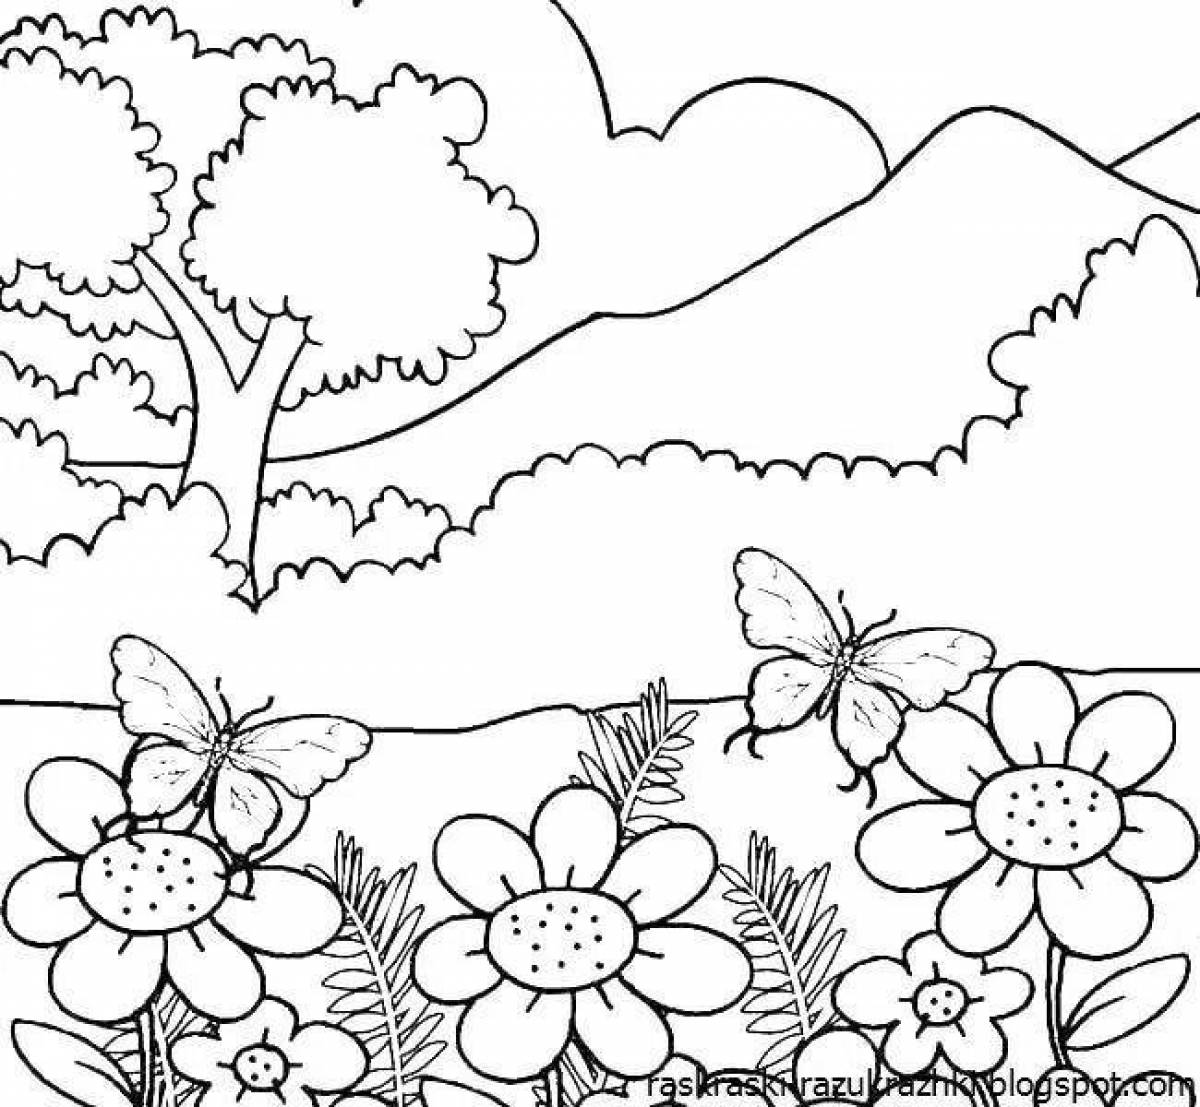 Playful seal coloring page